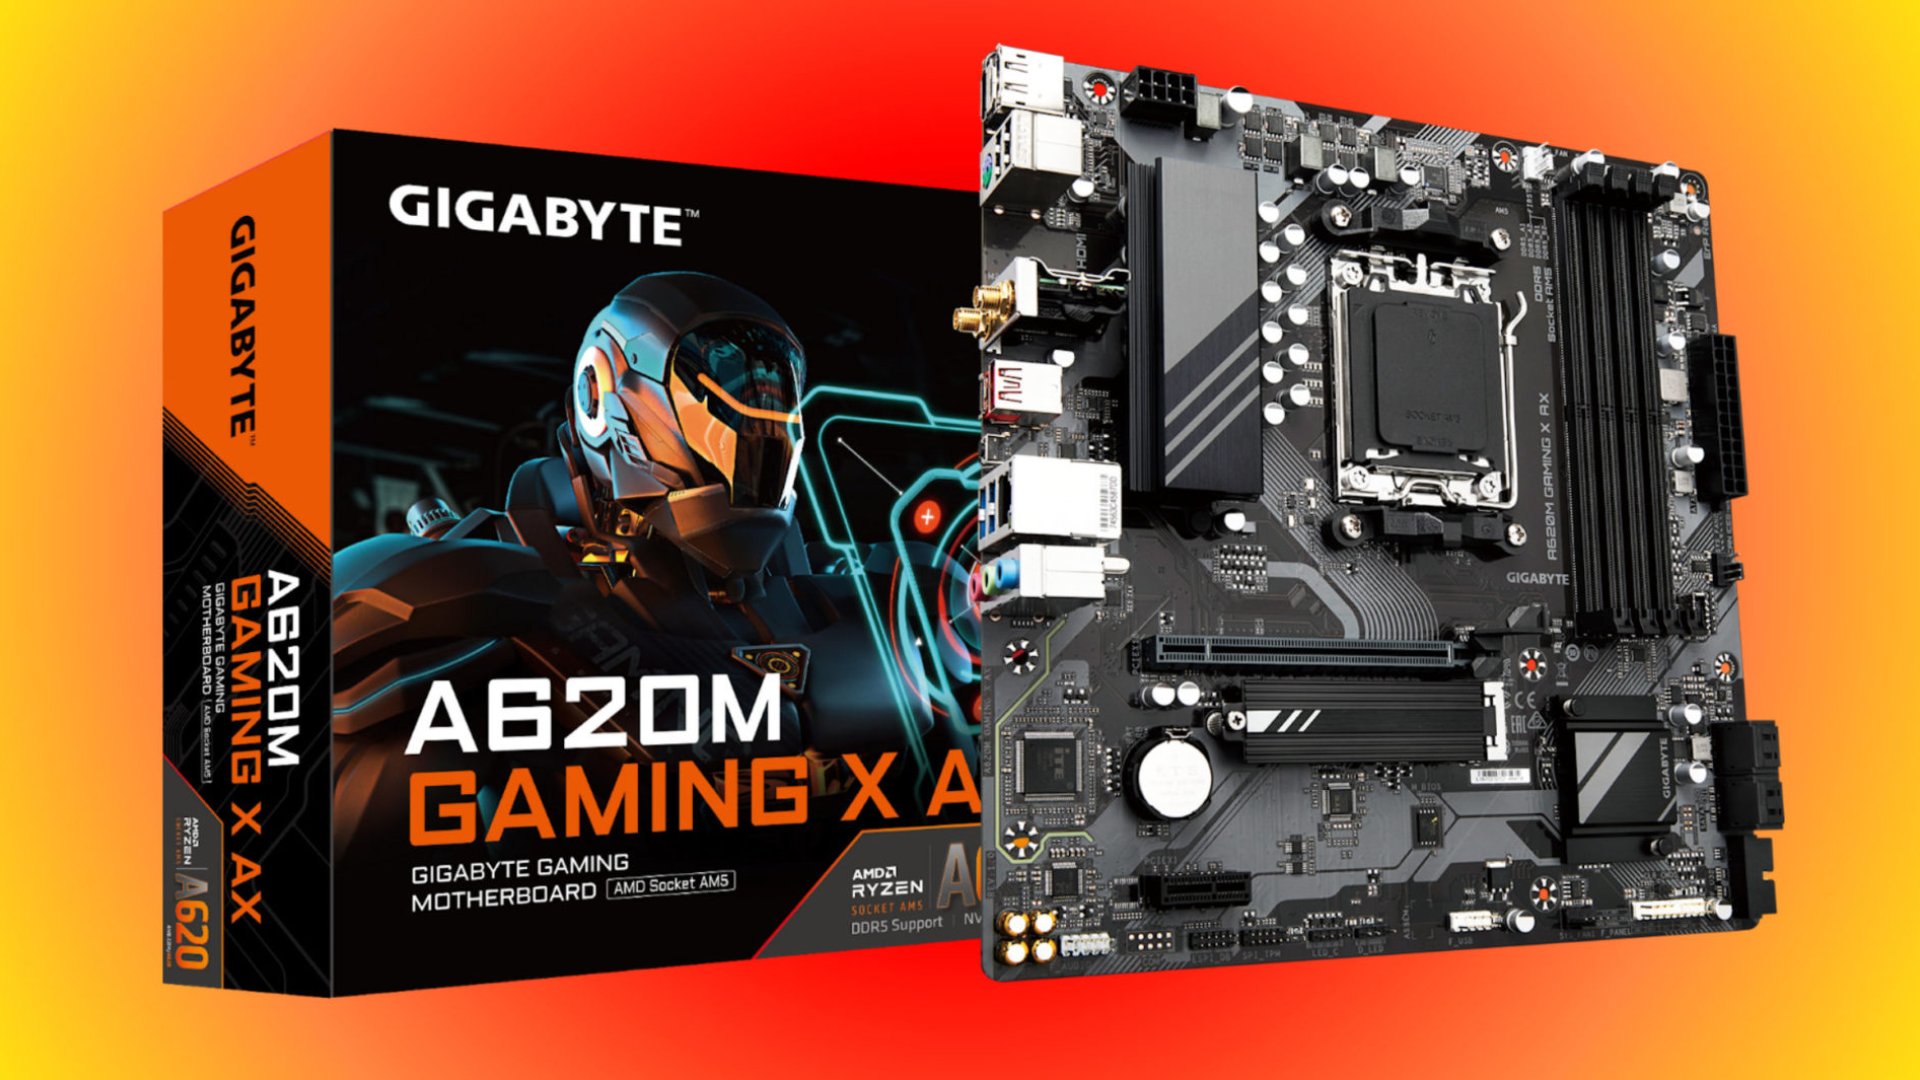  
AMD's affordable $85 A620 motherboards should fix Ryzen's price premium 